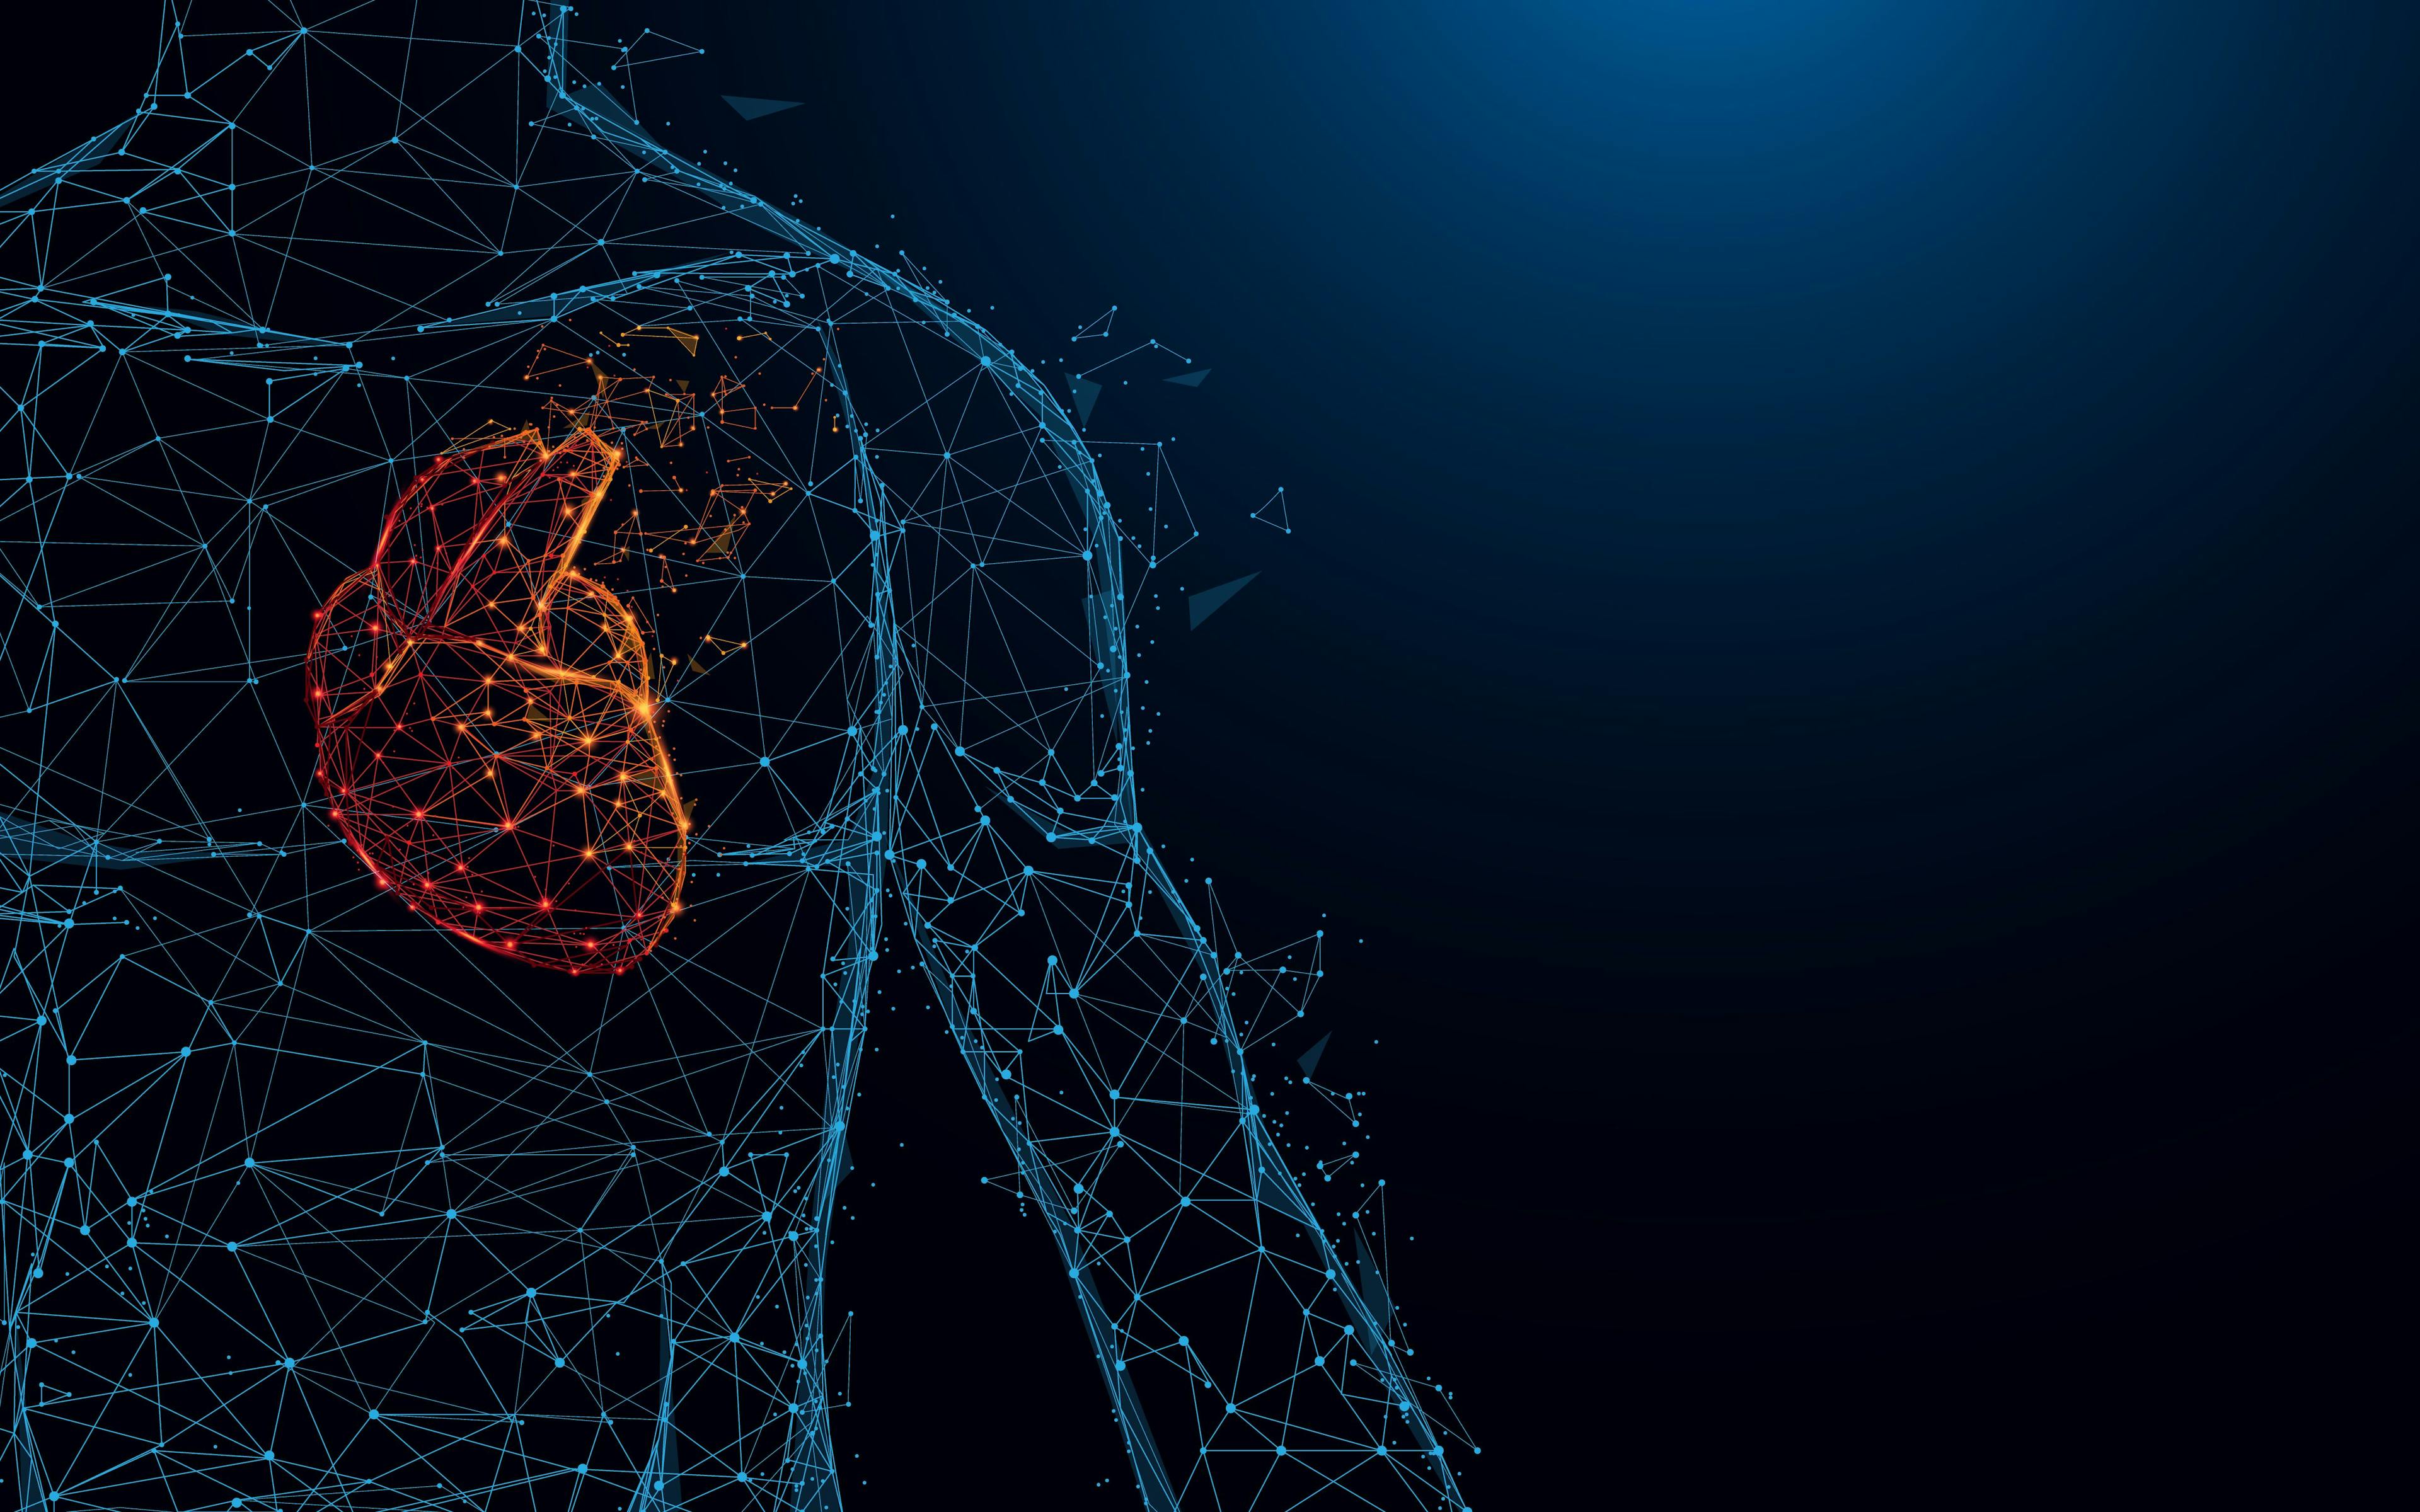 Human heart anatomy form lines and triangles, point connecting network on blue background. Illustration vector: © pickup - stock.adobe.com


